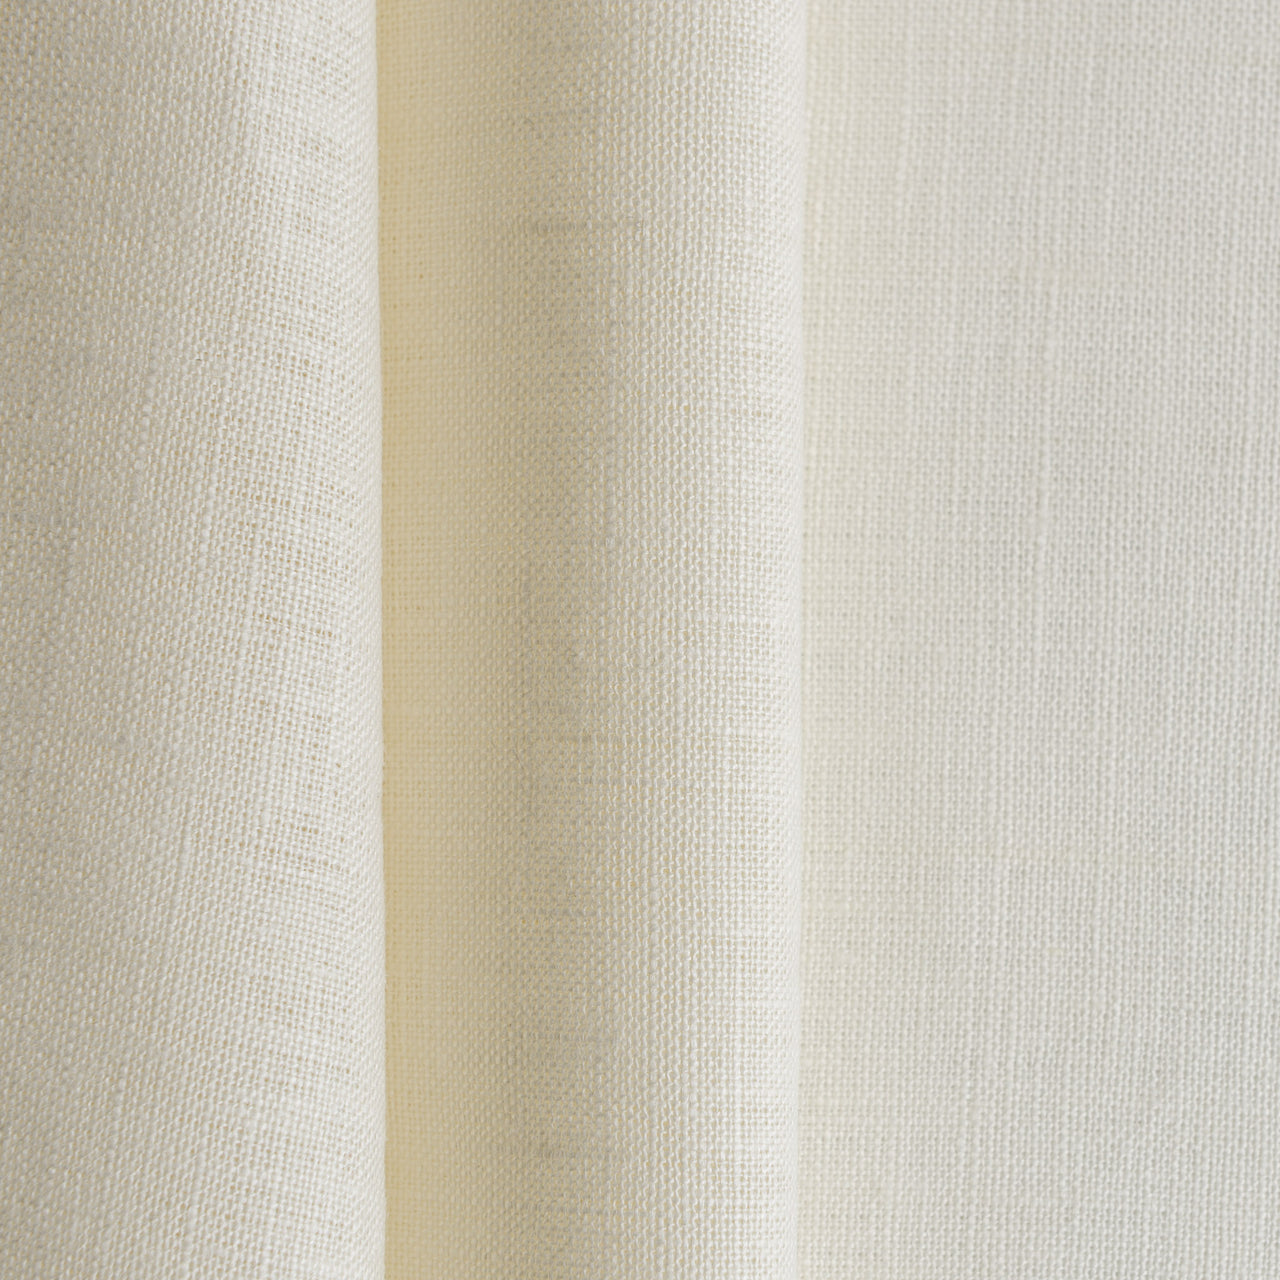 Cream Tab Top Linen Curtain with Cotton Lining - Custom Width and Length